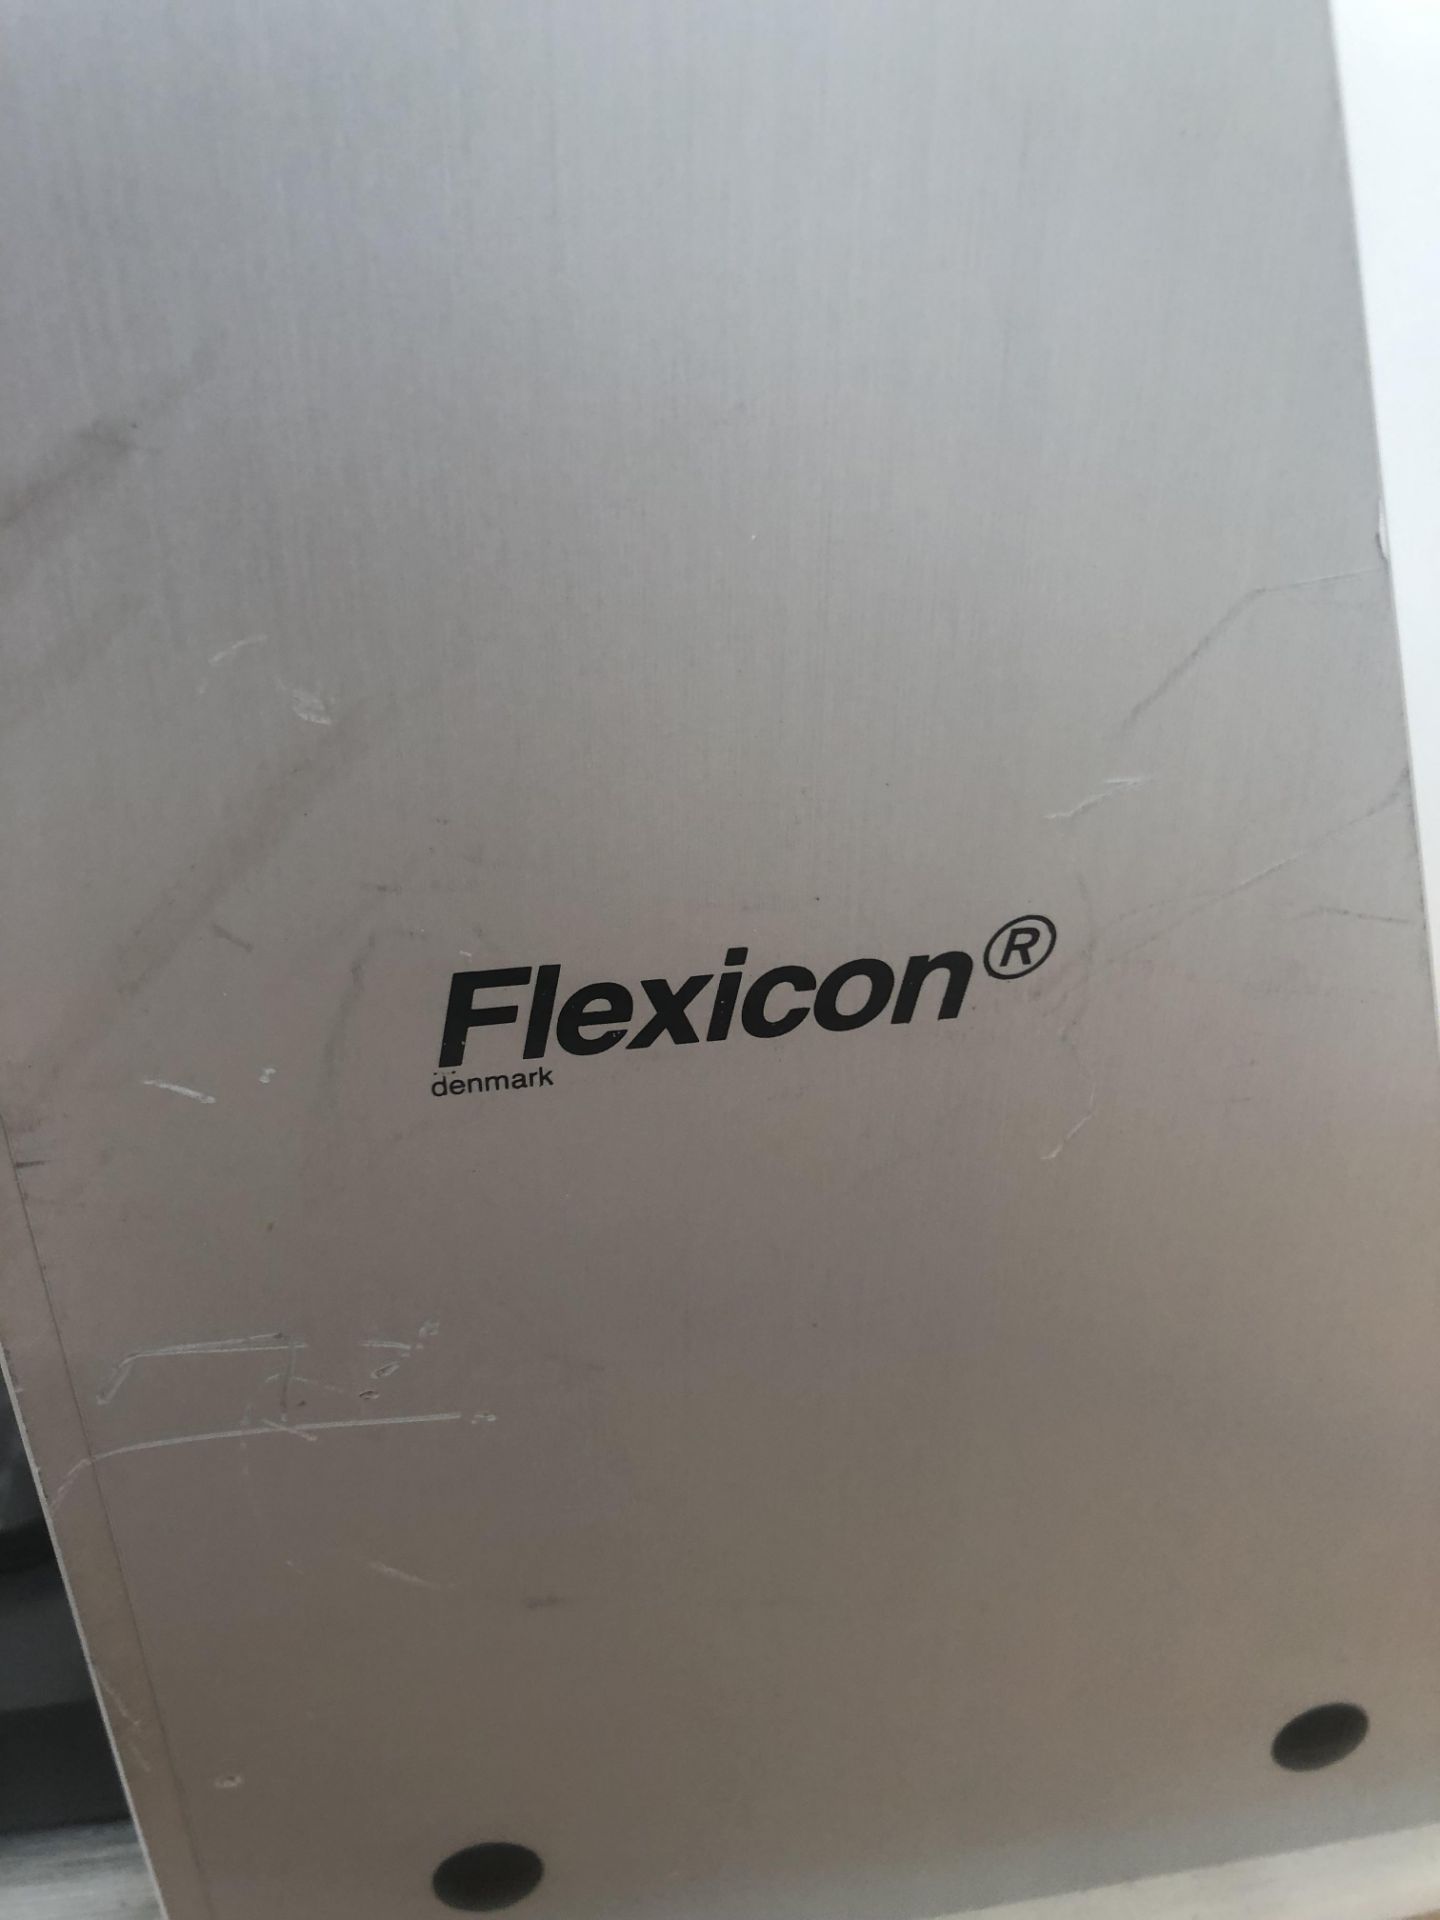 Flexicon Tabletop Crimp Capping System 2006 - Image 4 of 5